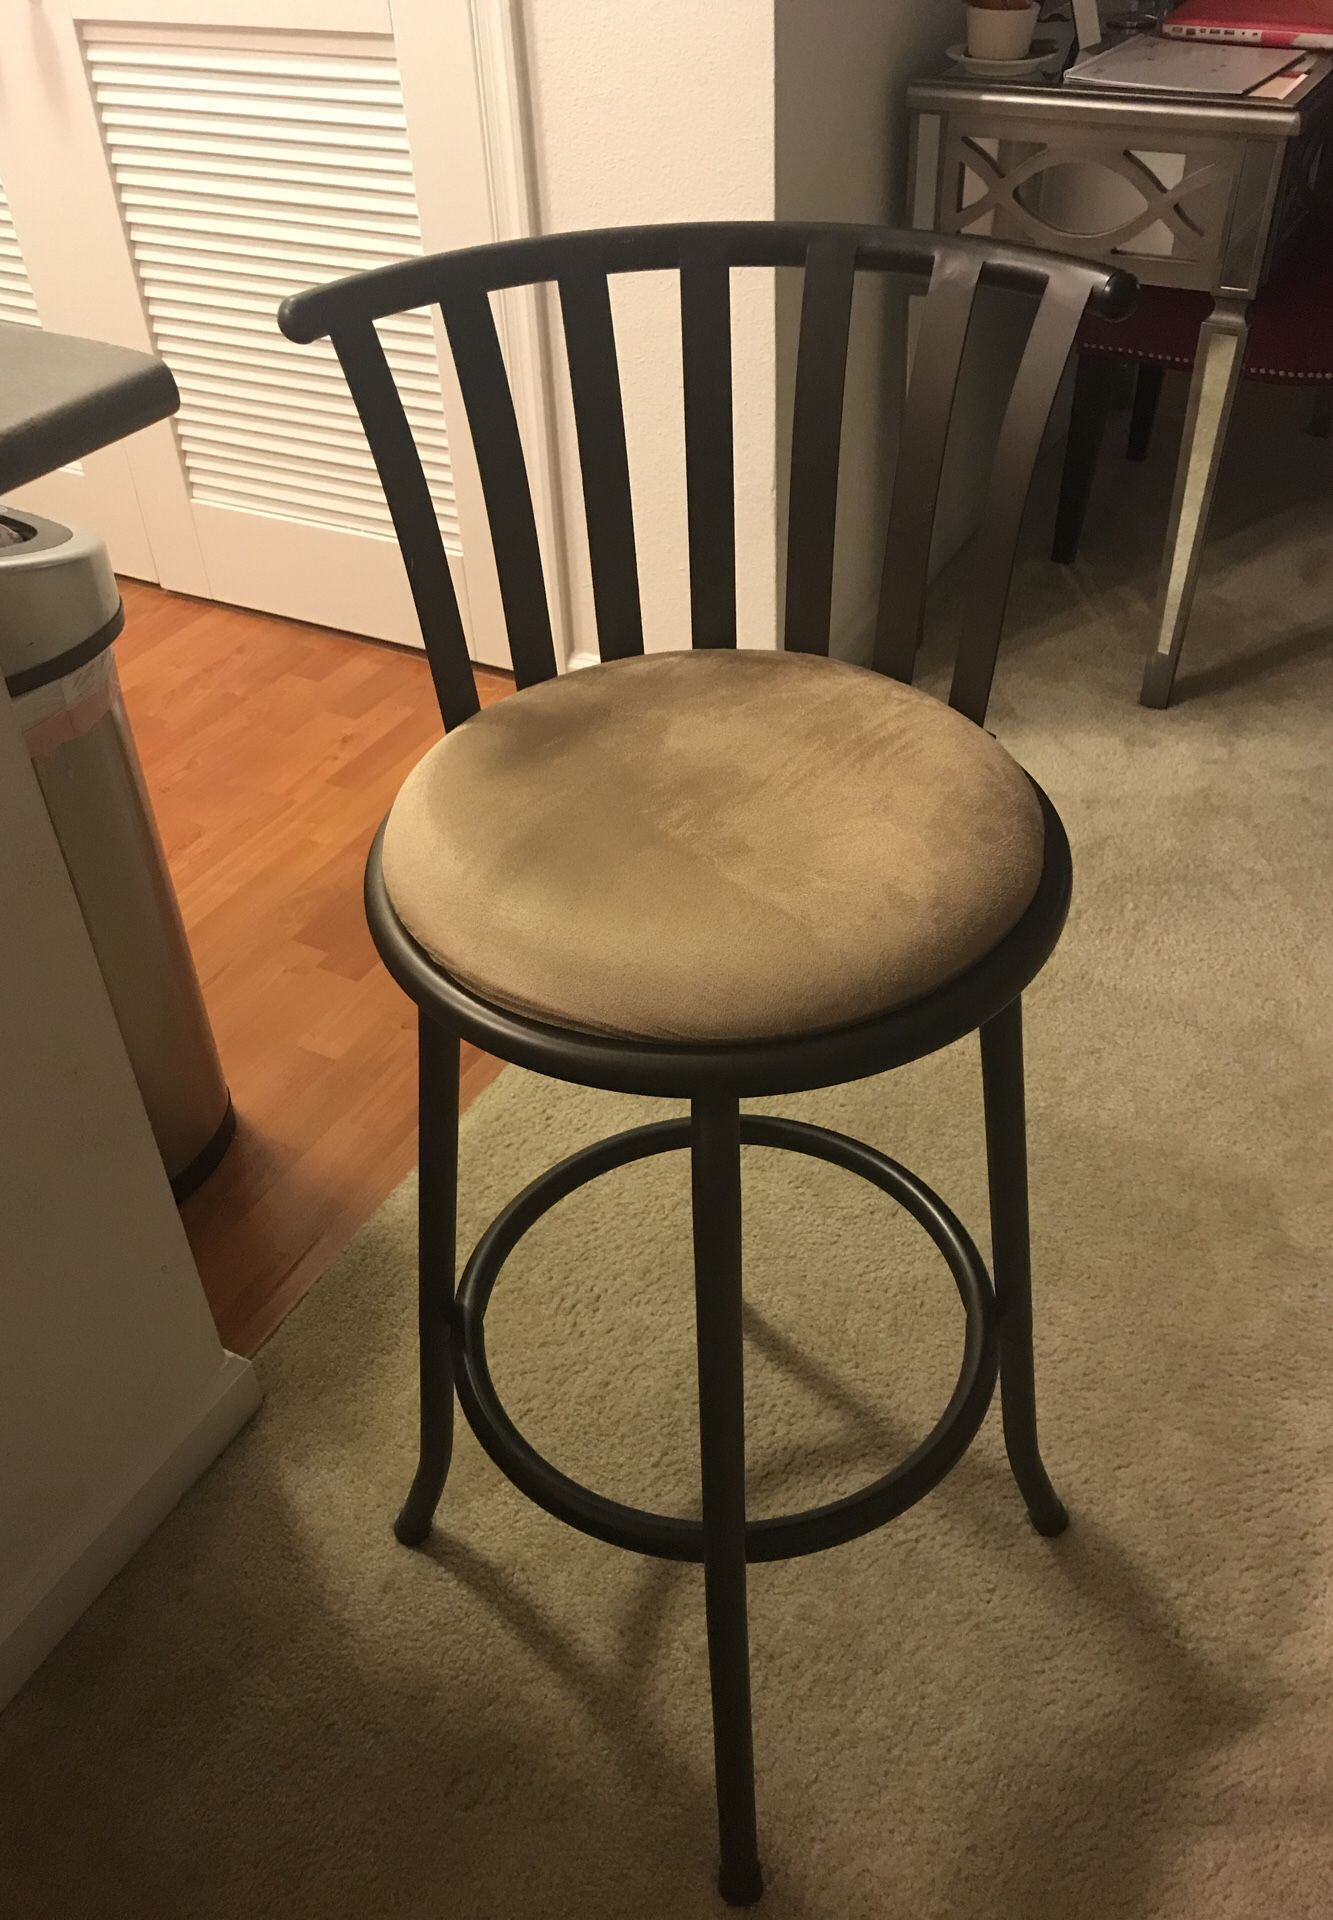 2 bar stools for $50